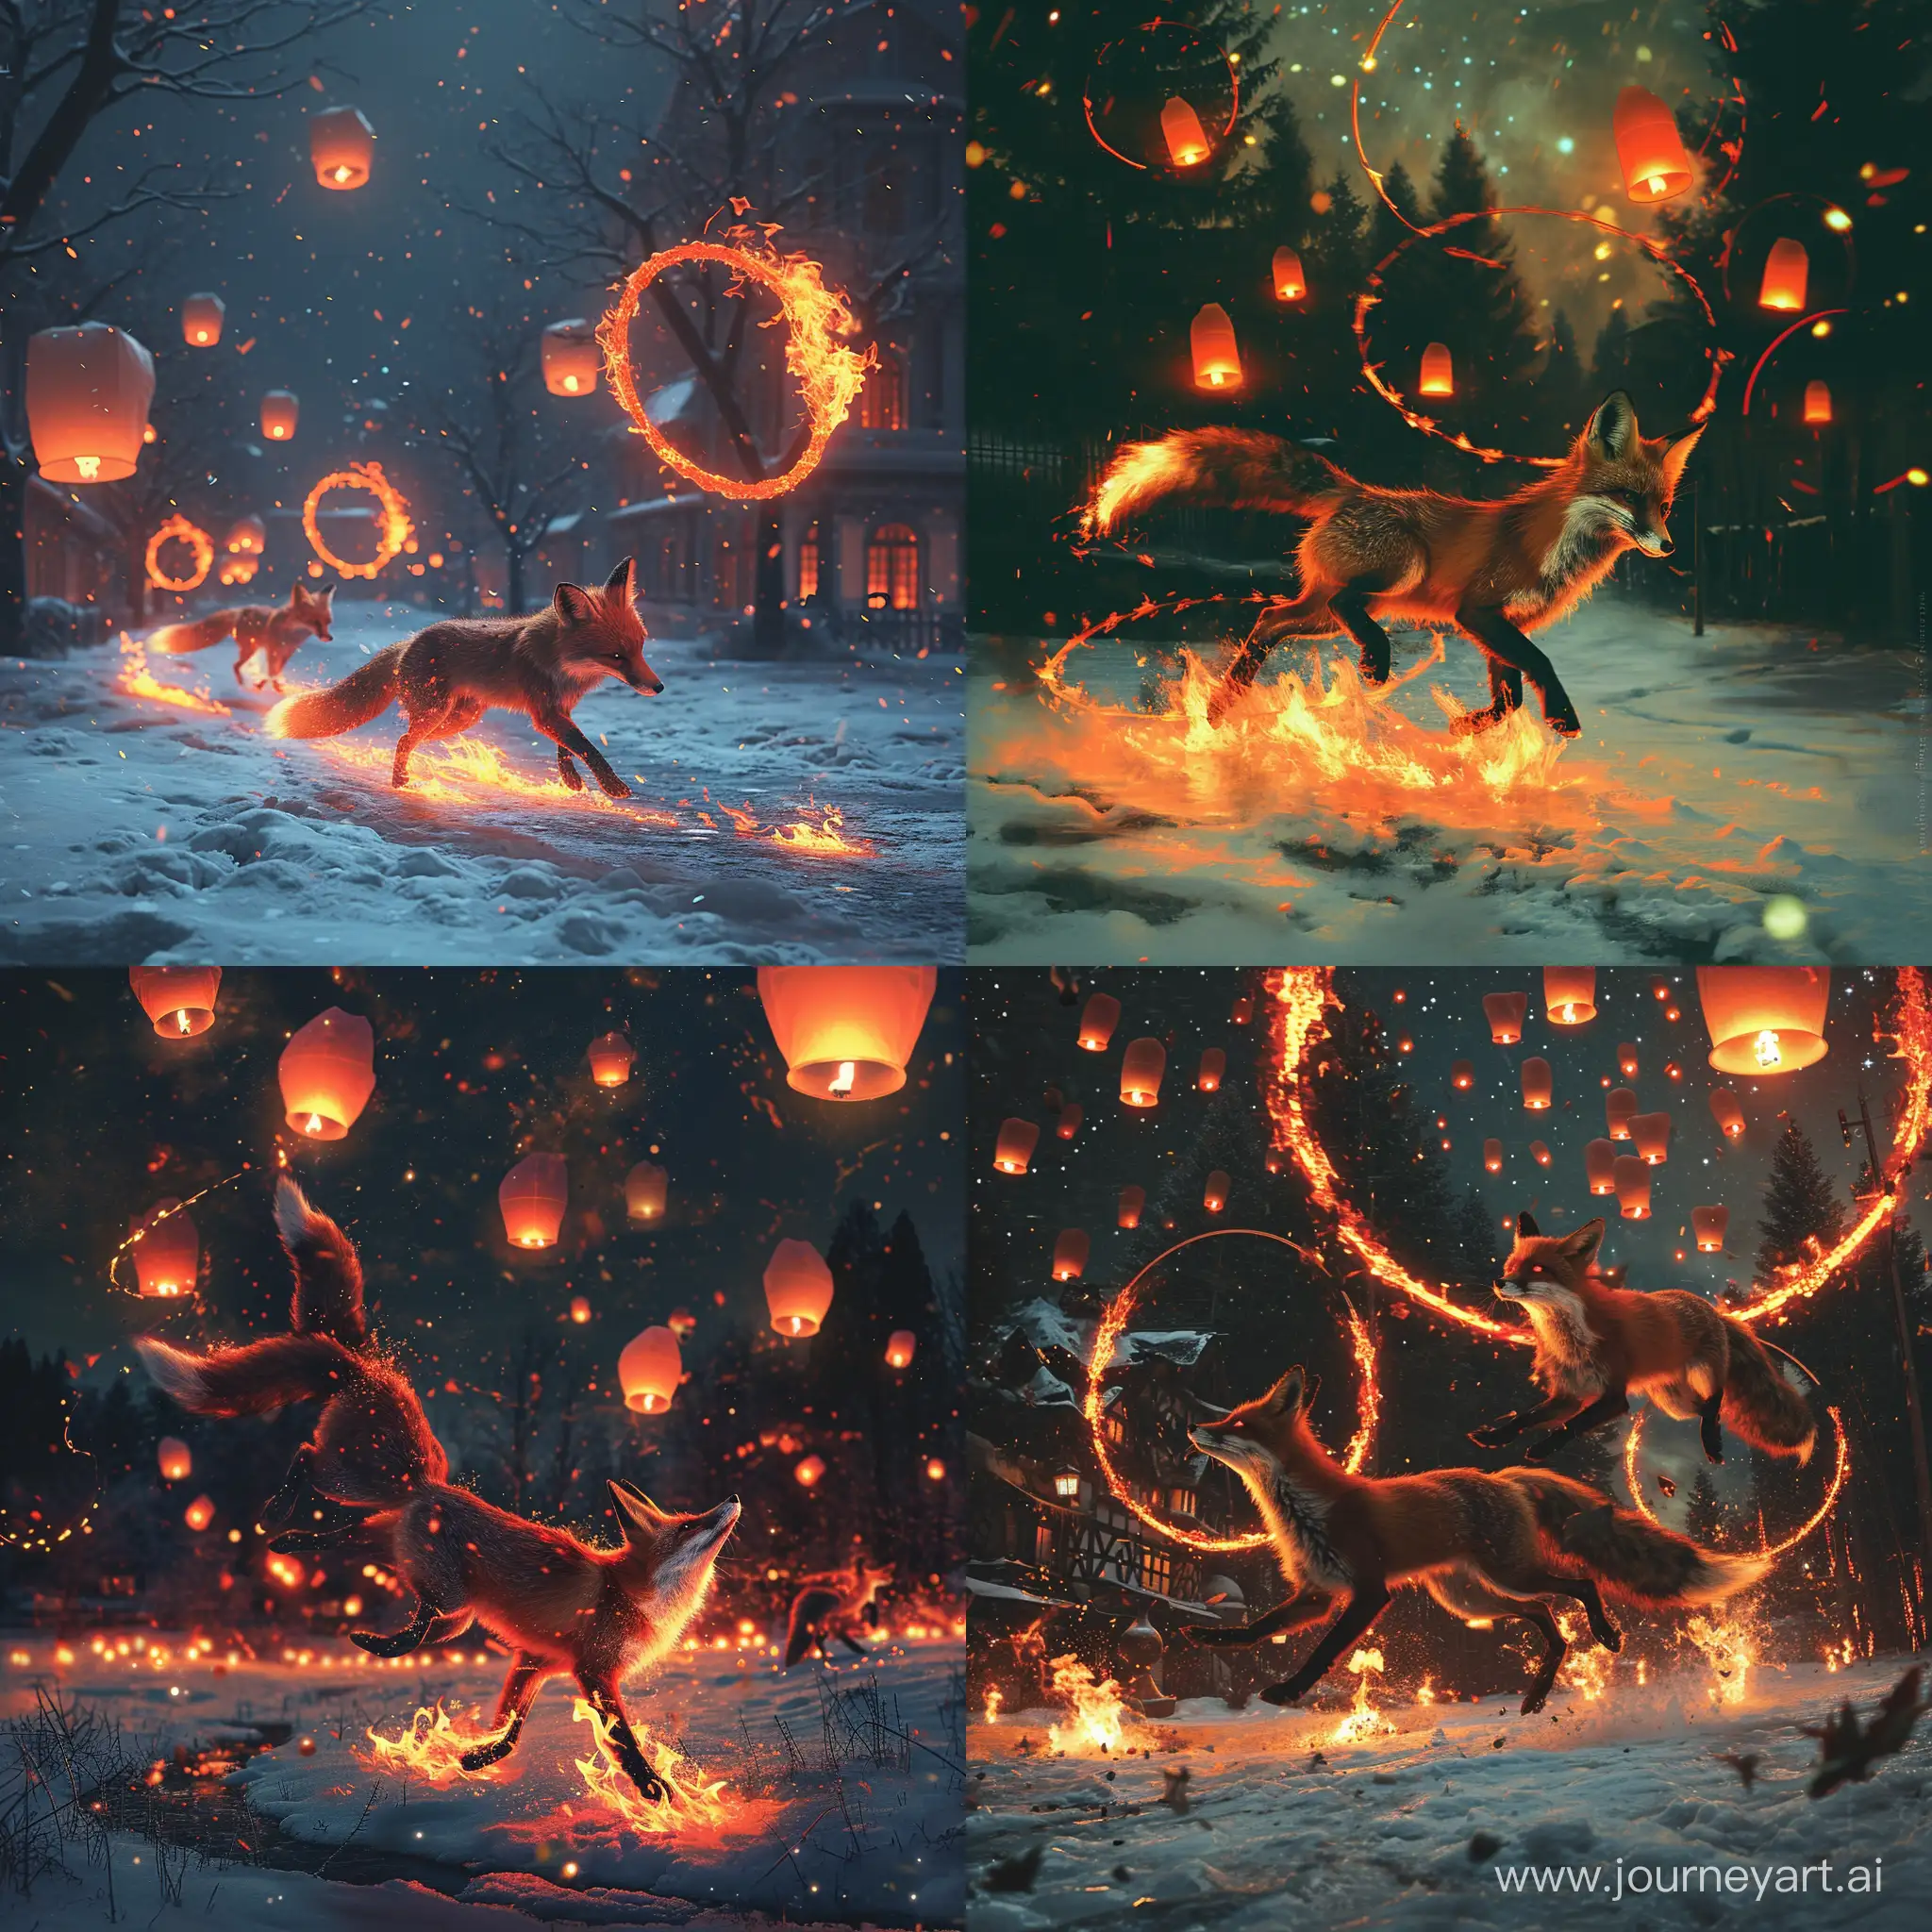 Enchanting-Night-Foxes-with-Glowing-Fur-and-Sky-Lanterns-Illuminate-Snowy-Streets